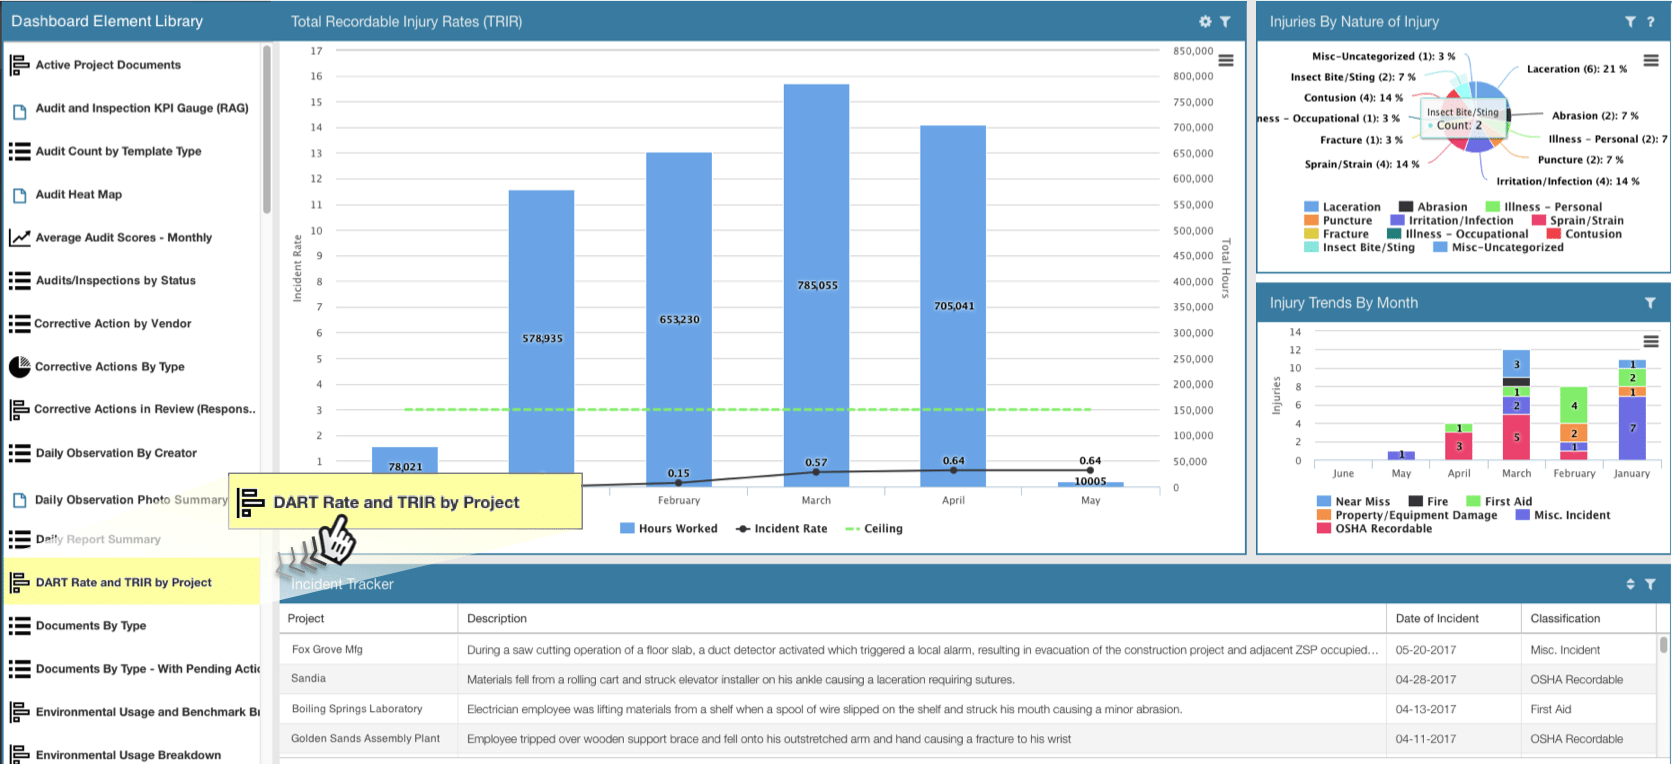 CUSTOMIZABLE DASHBOARDS make life simple for everyone, by just presenting the information they need.